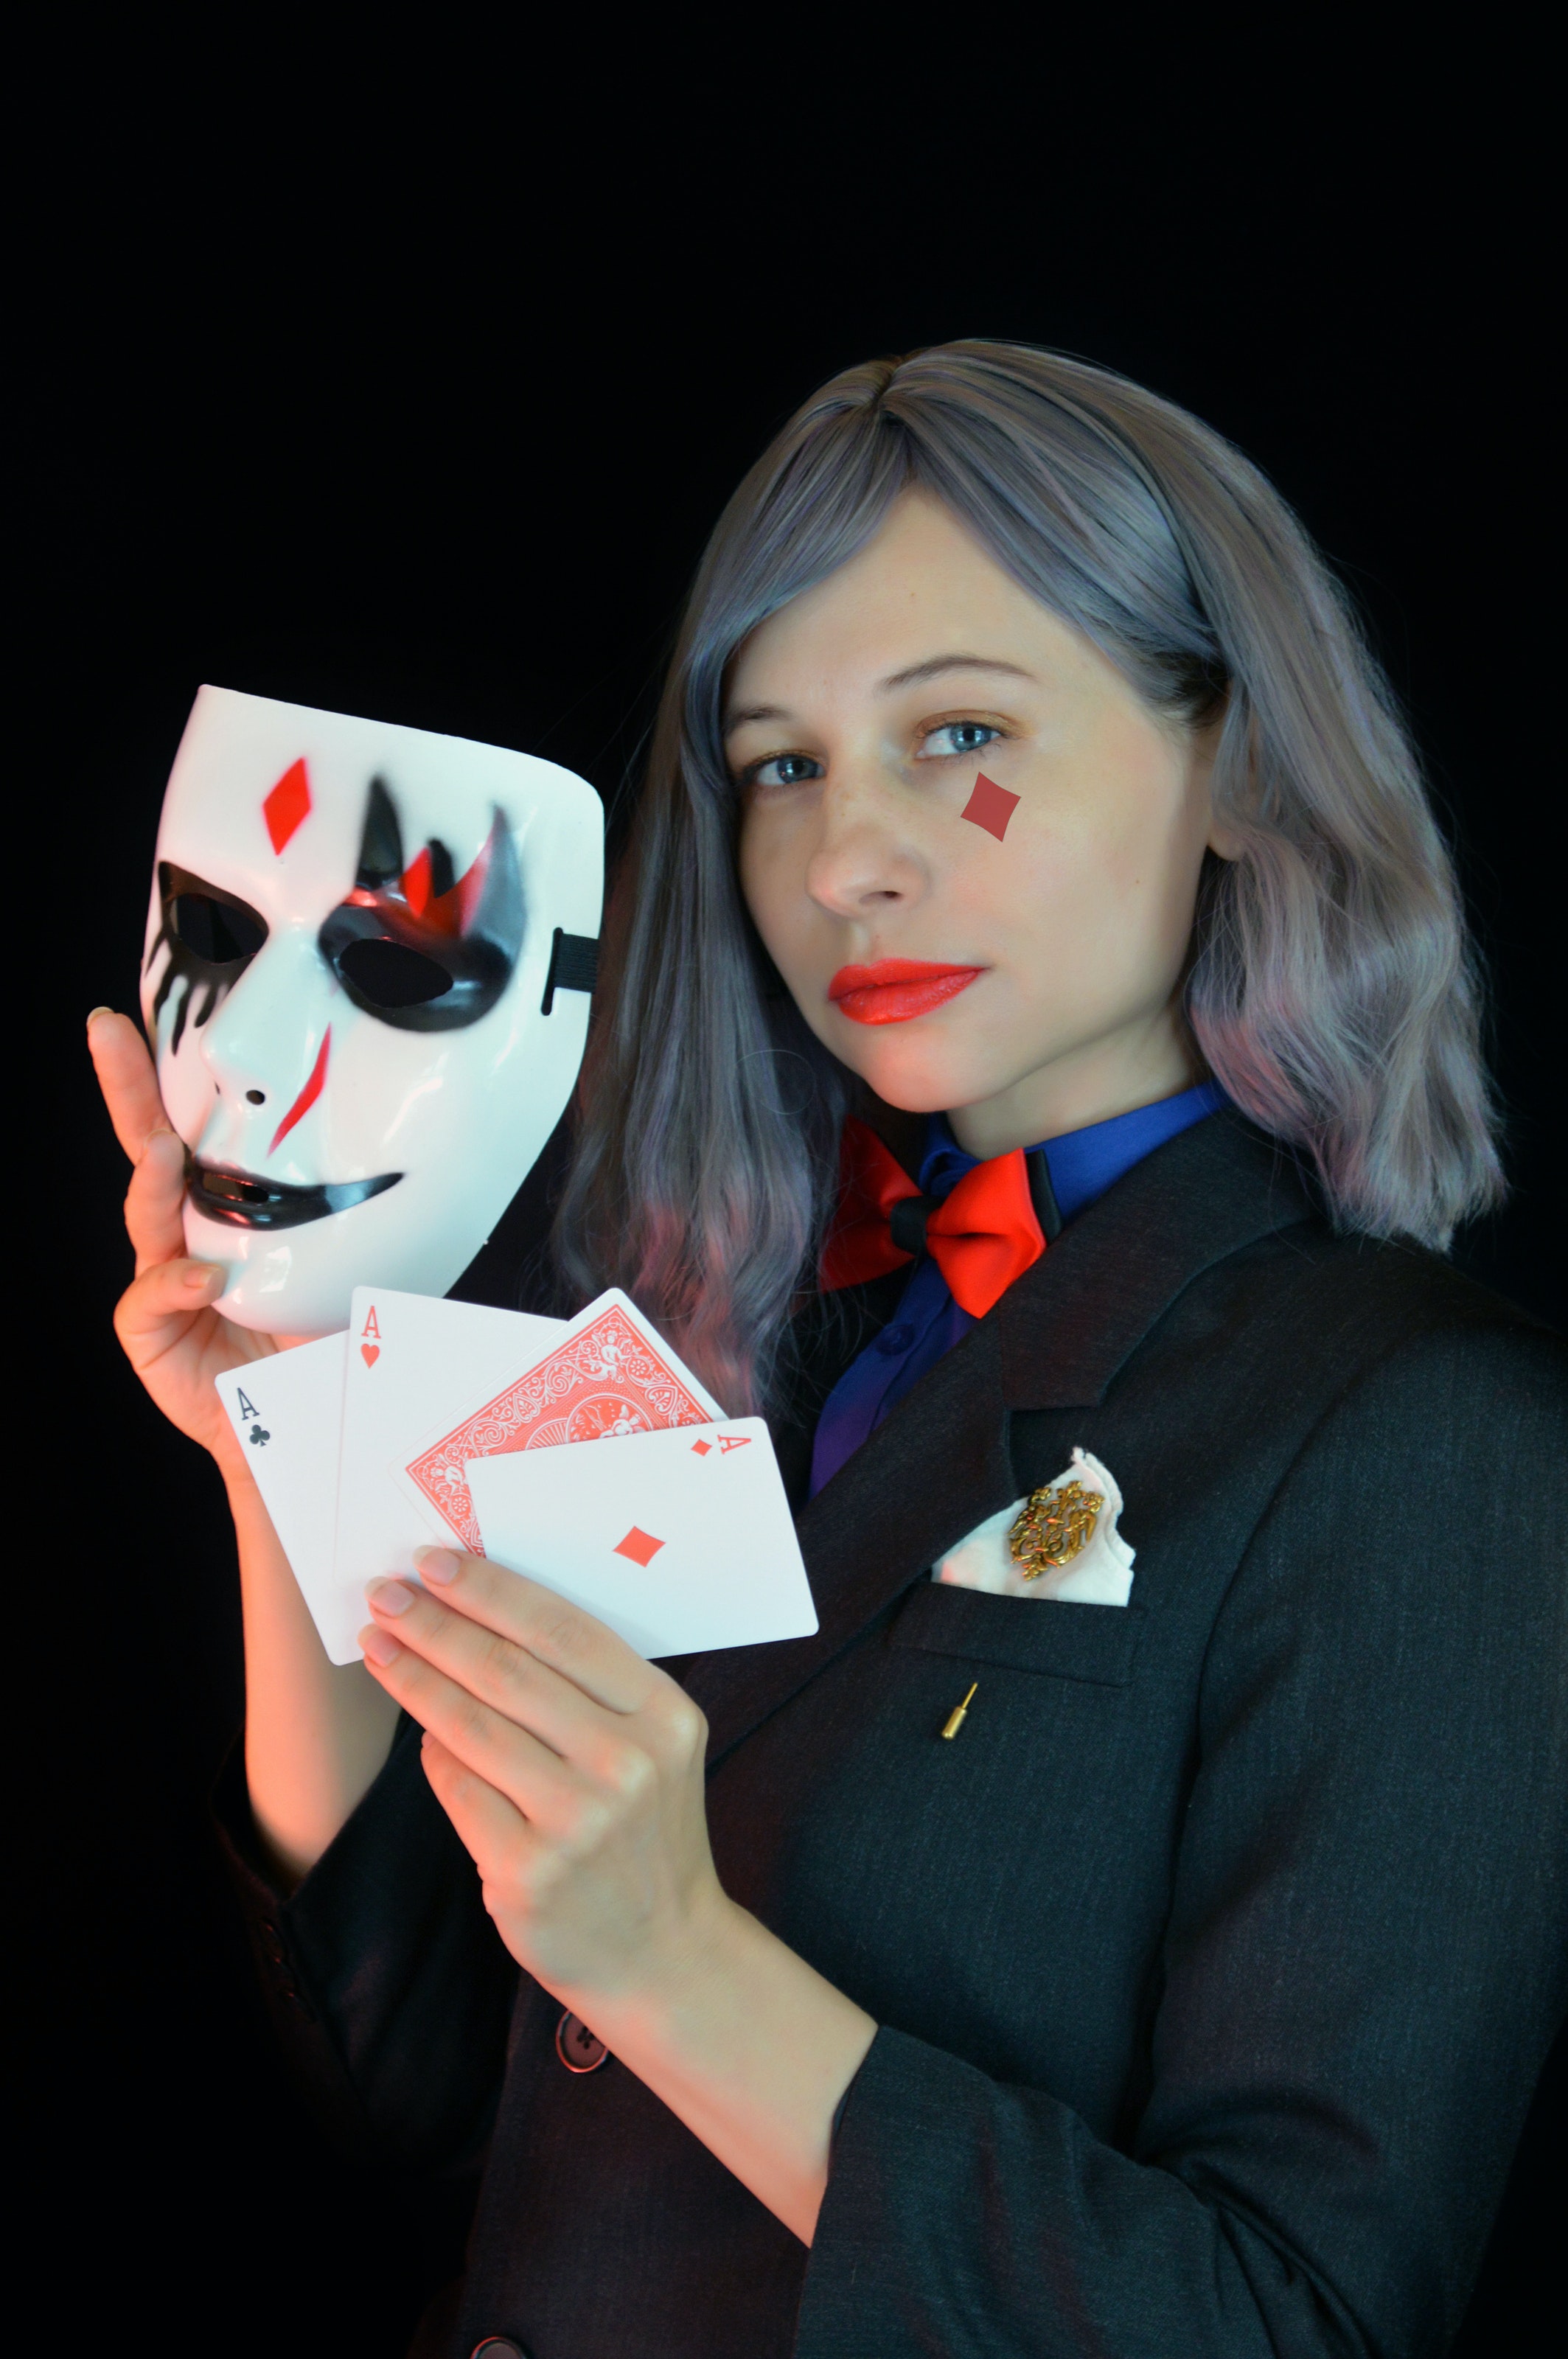 girl in black holding a mask and cards